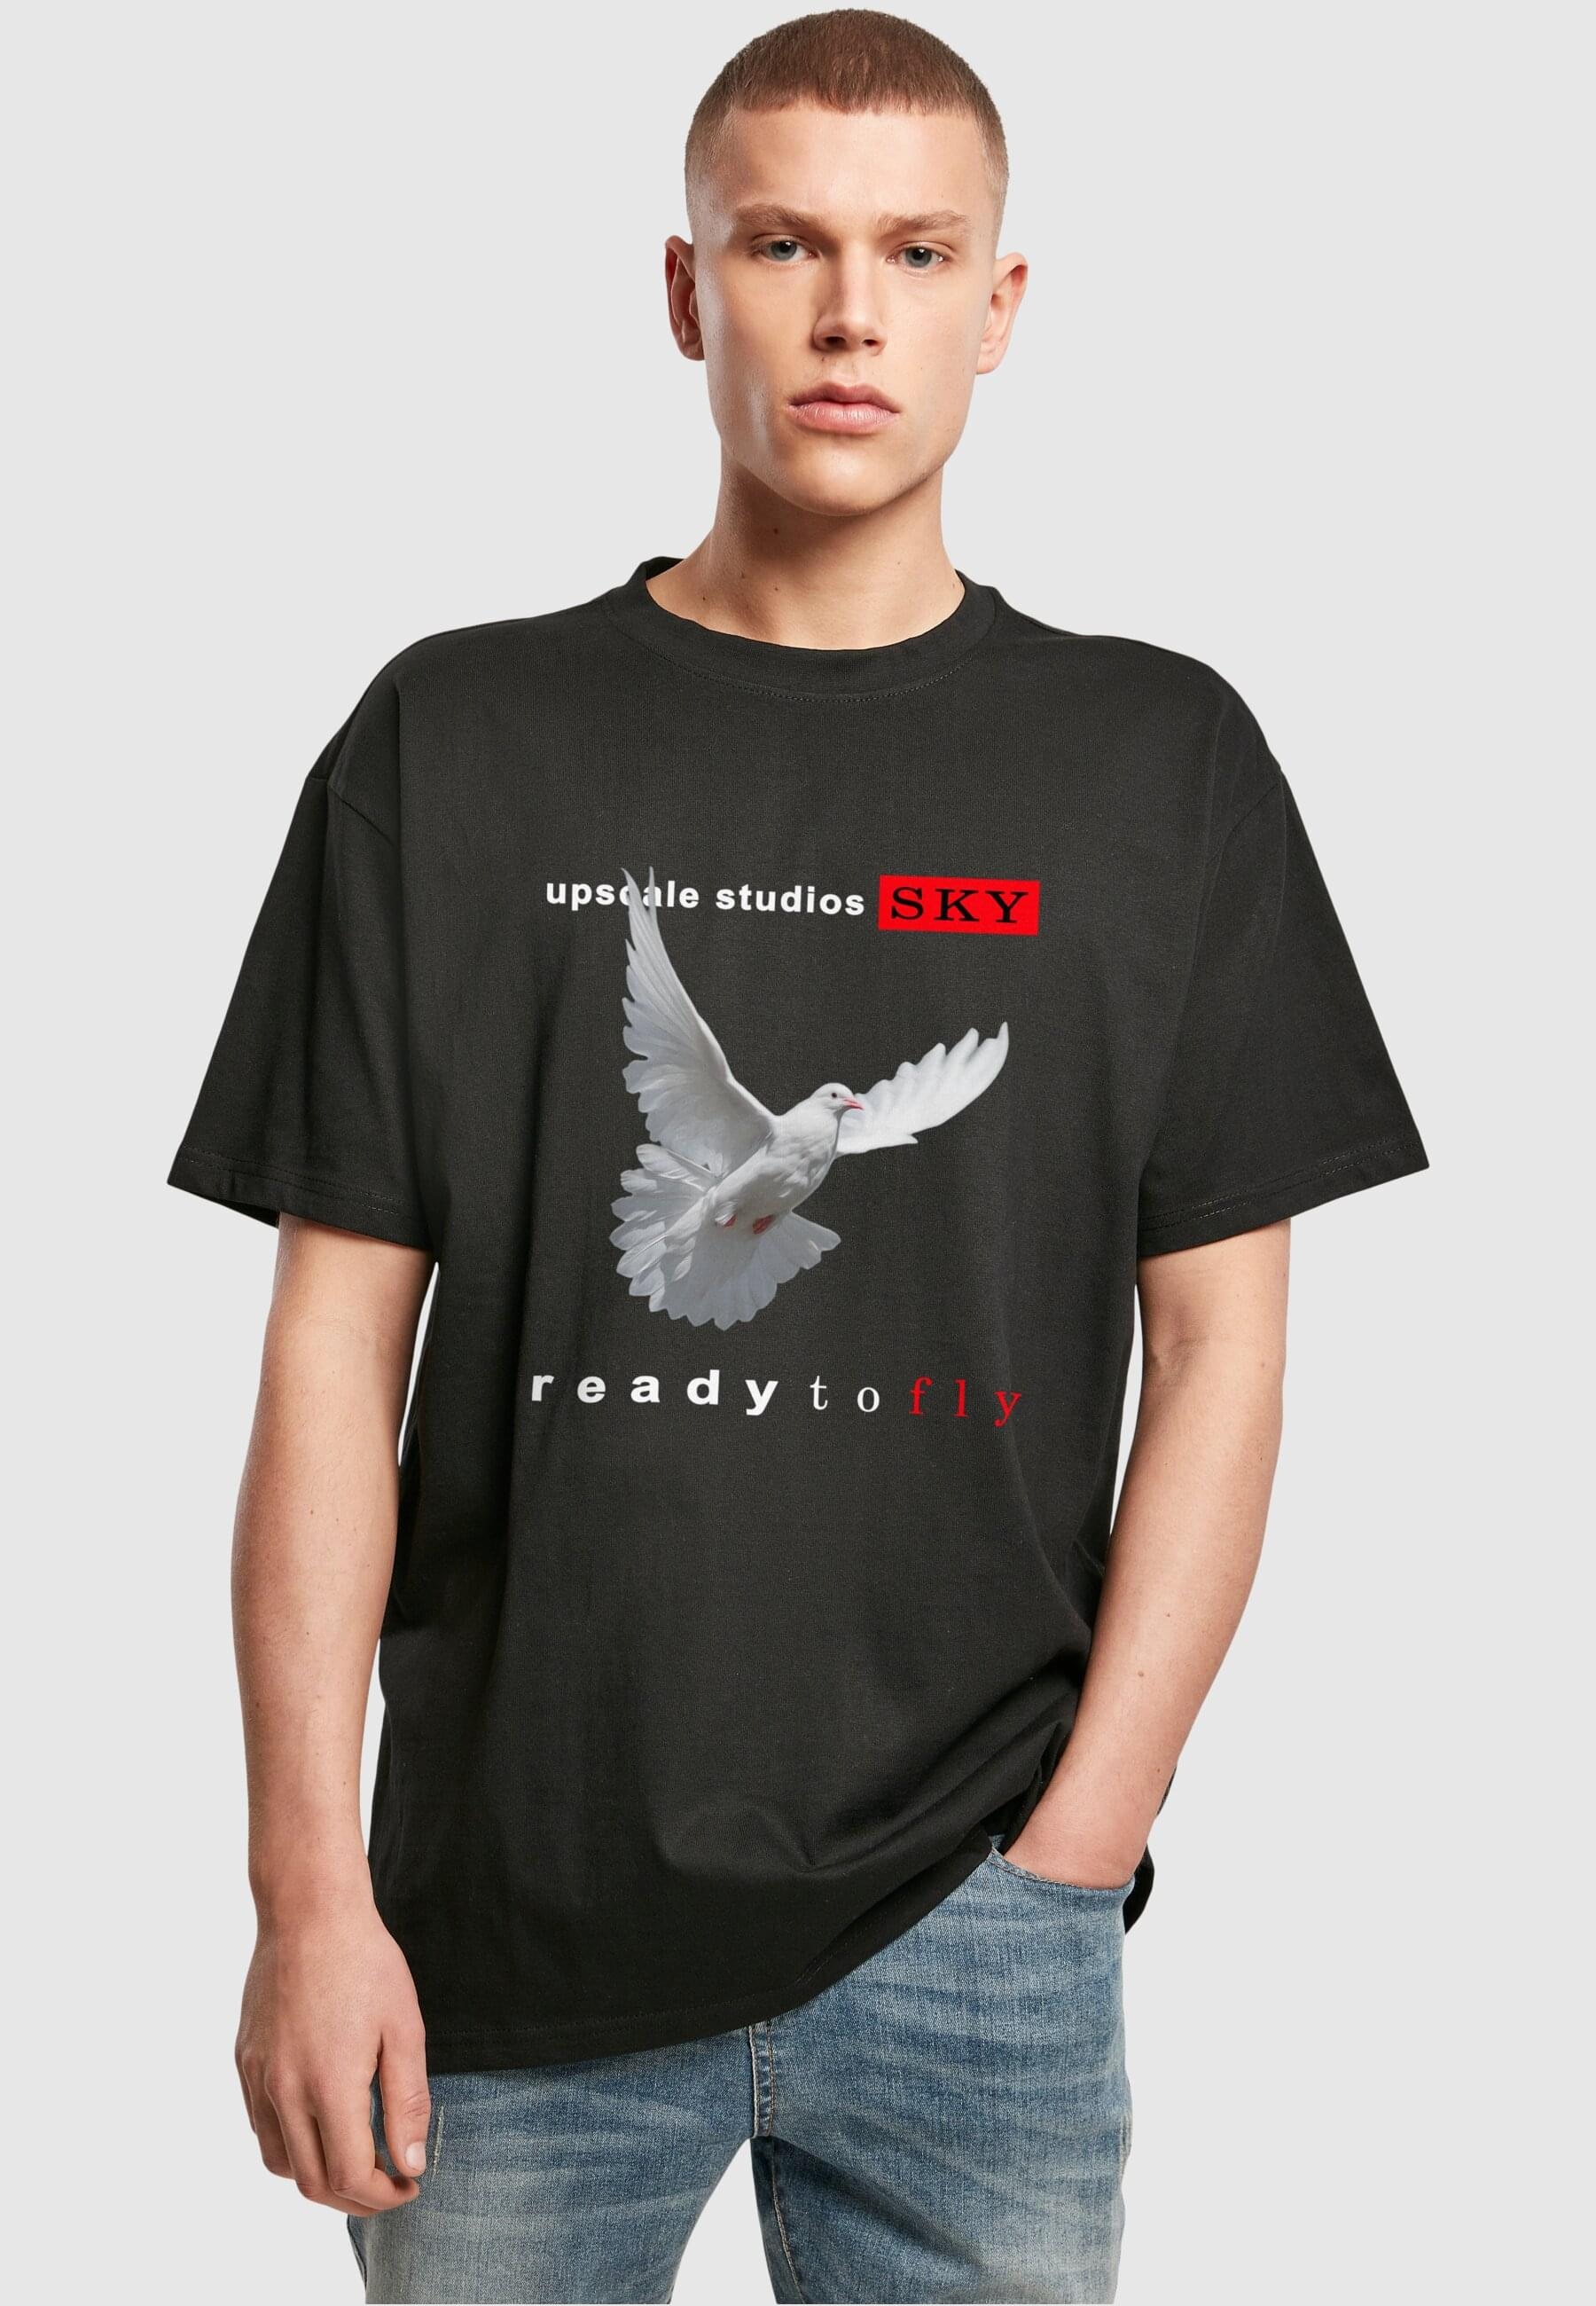 Tee«, tlg.) BAUR Oversize »Unisex T-Shirt to fly Ready by Tee Mister (1 kaufen ▷ Upscale |